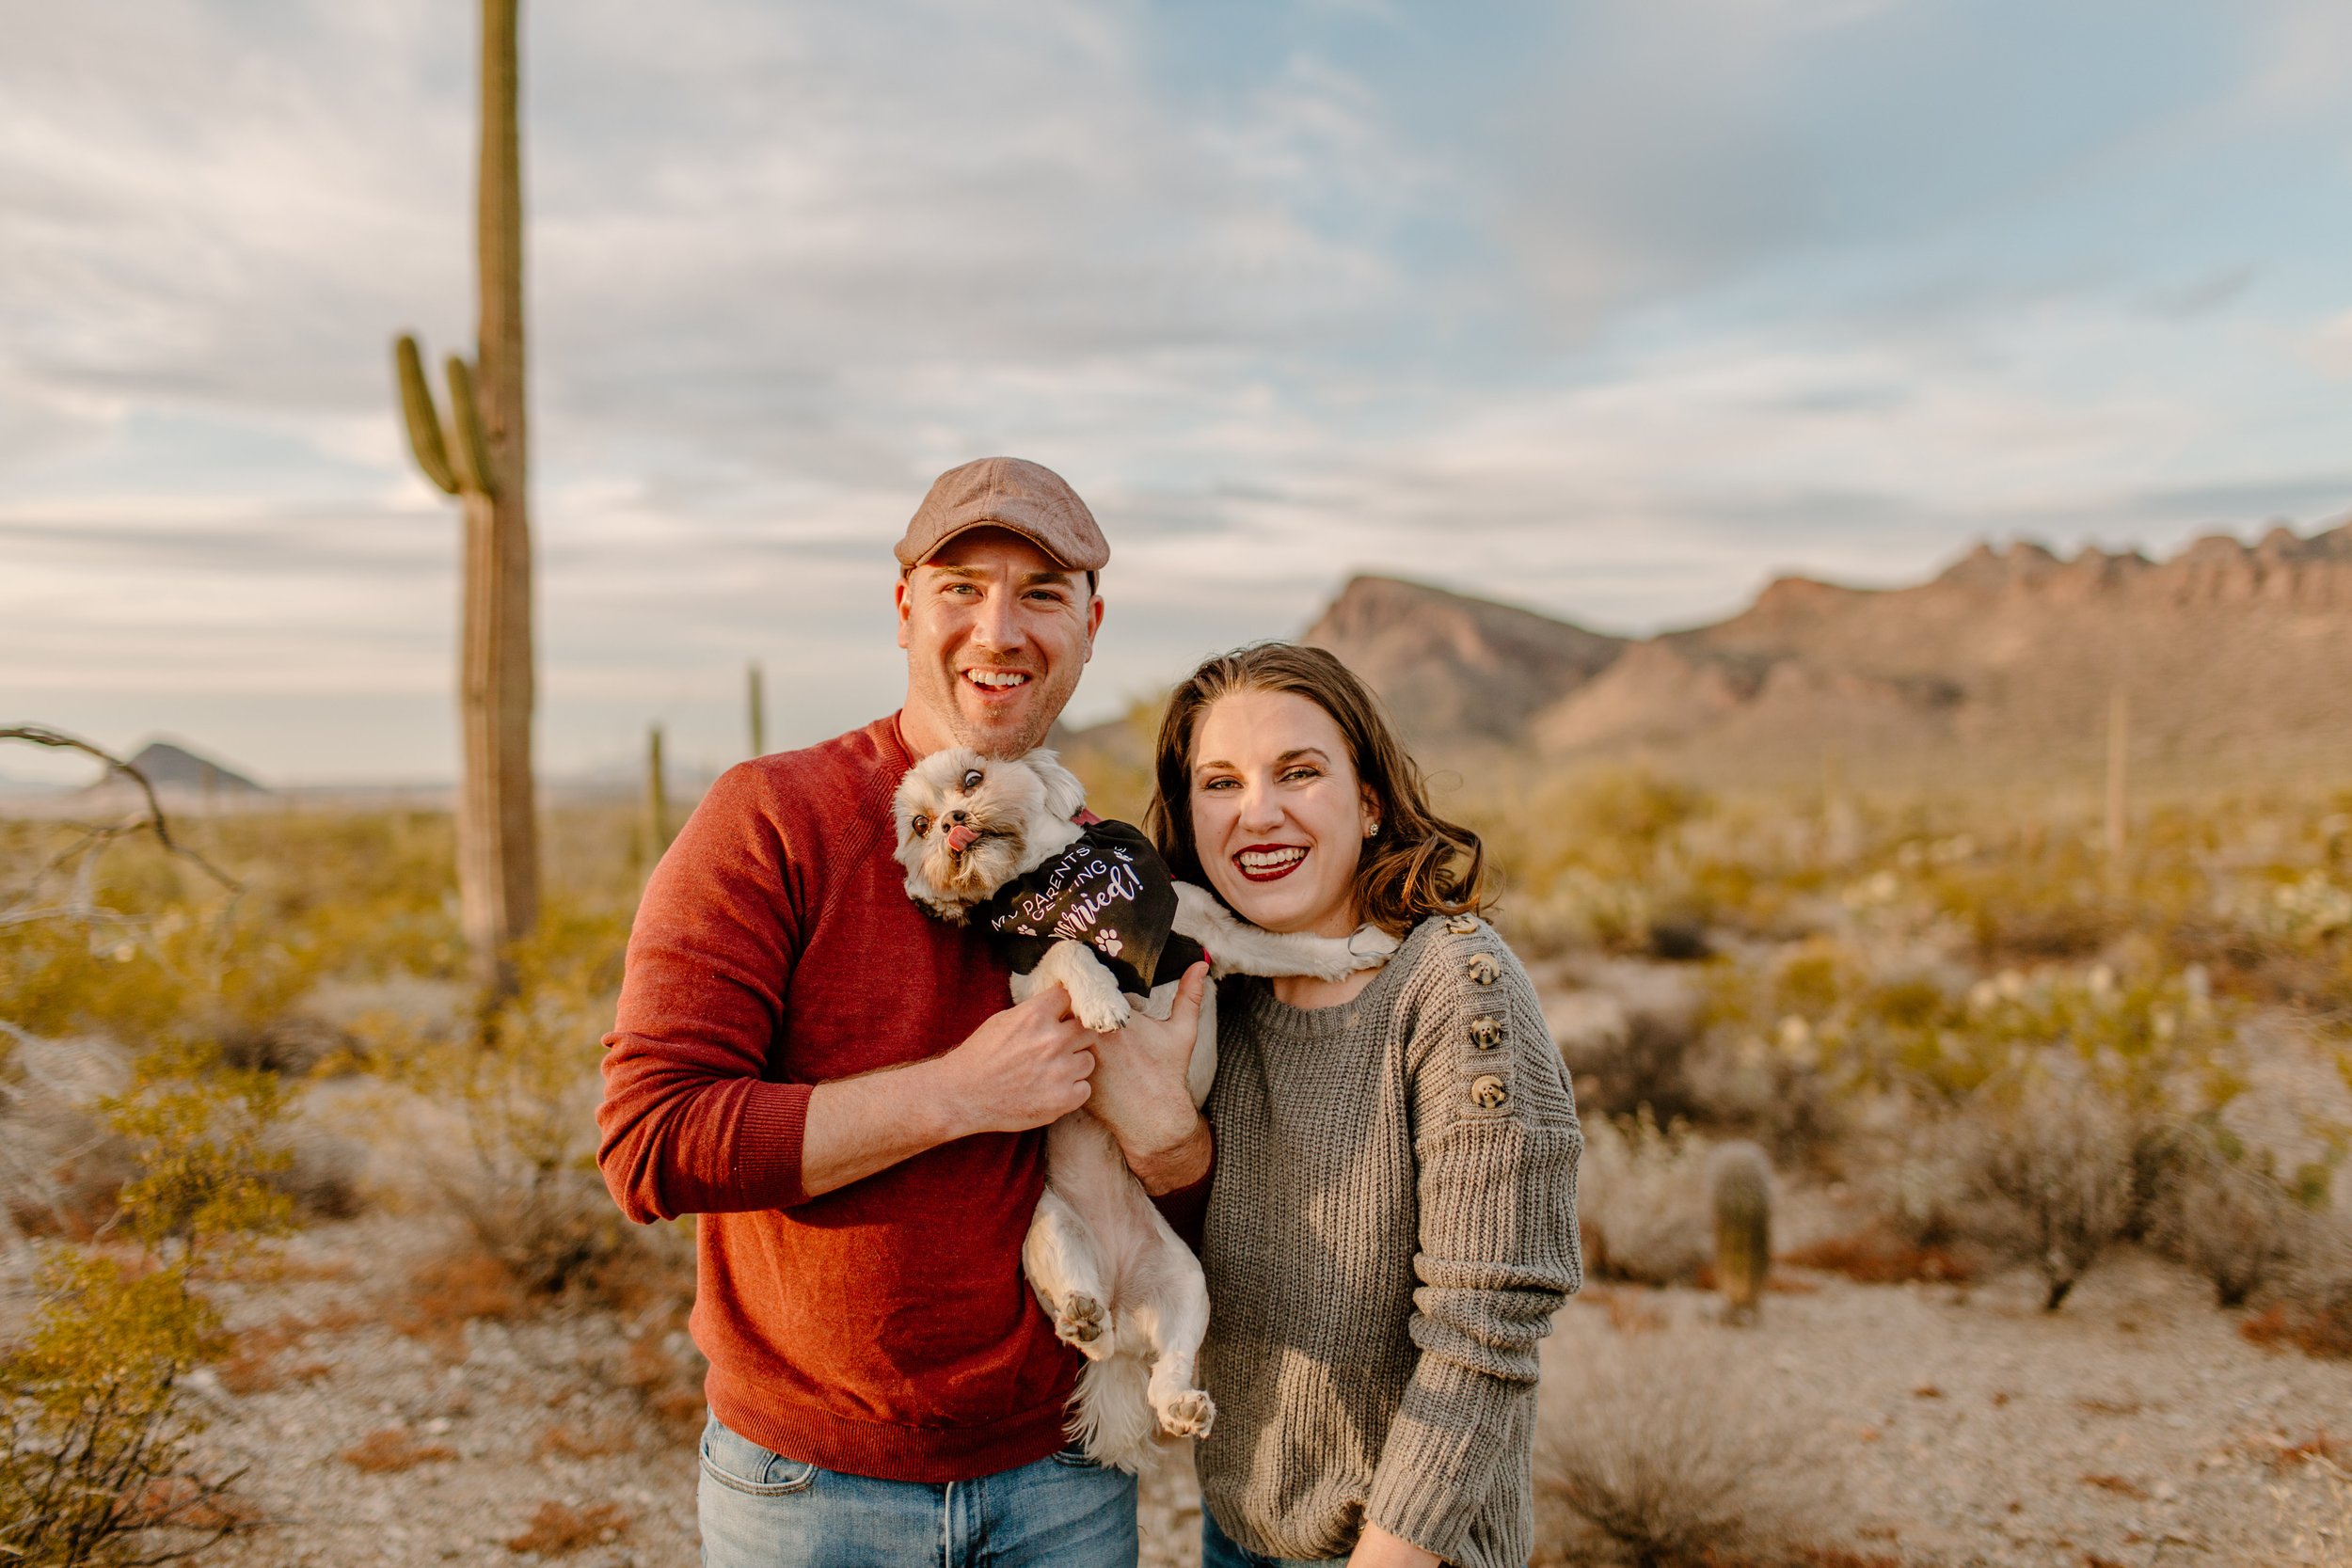  Couple smiles at camera while holding small dog making a silly face in Saguaro National Park in Tucosn Arizona 